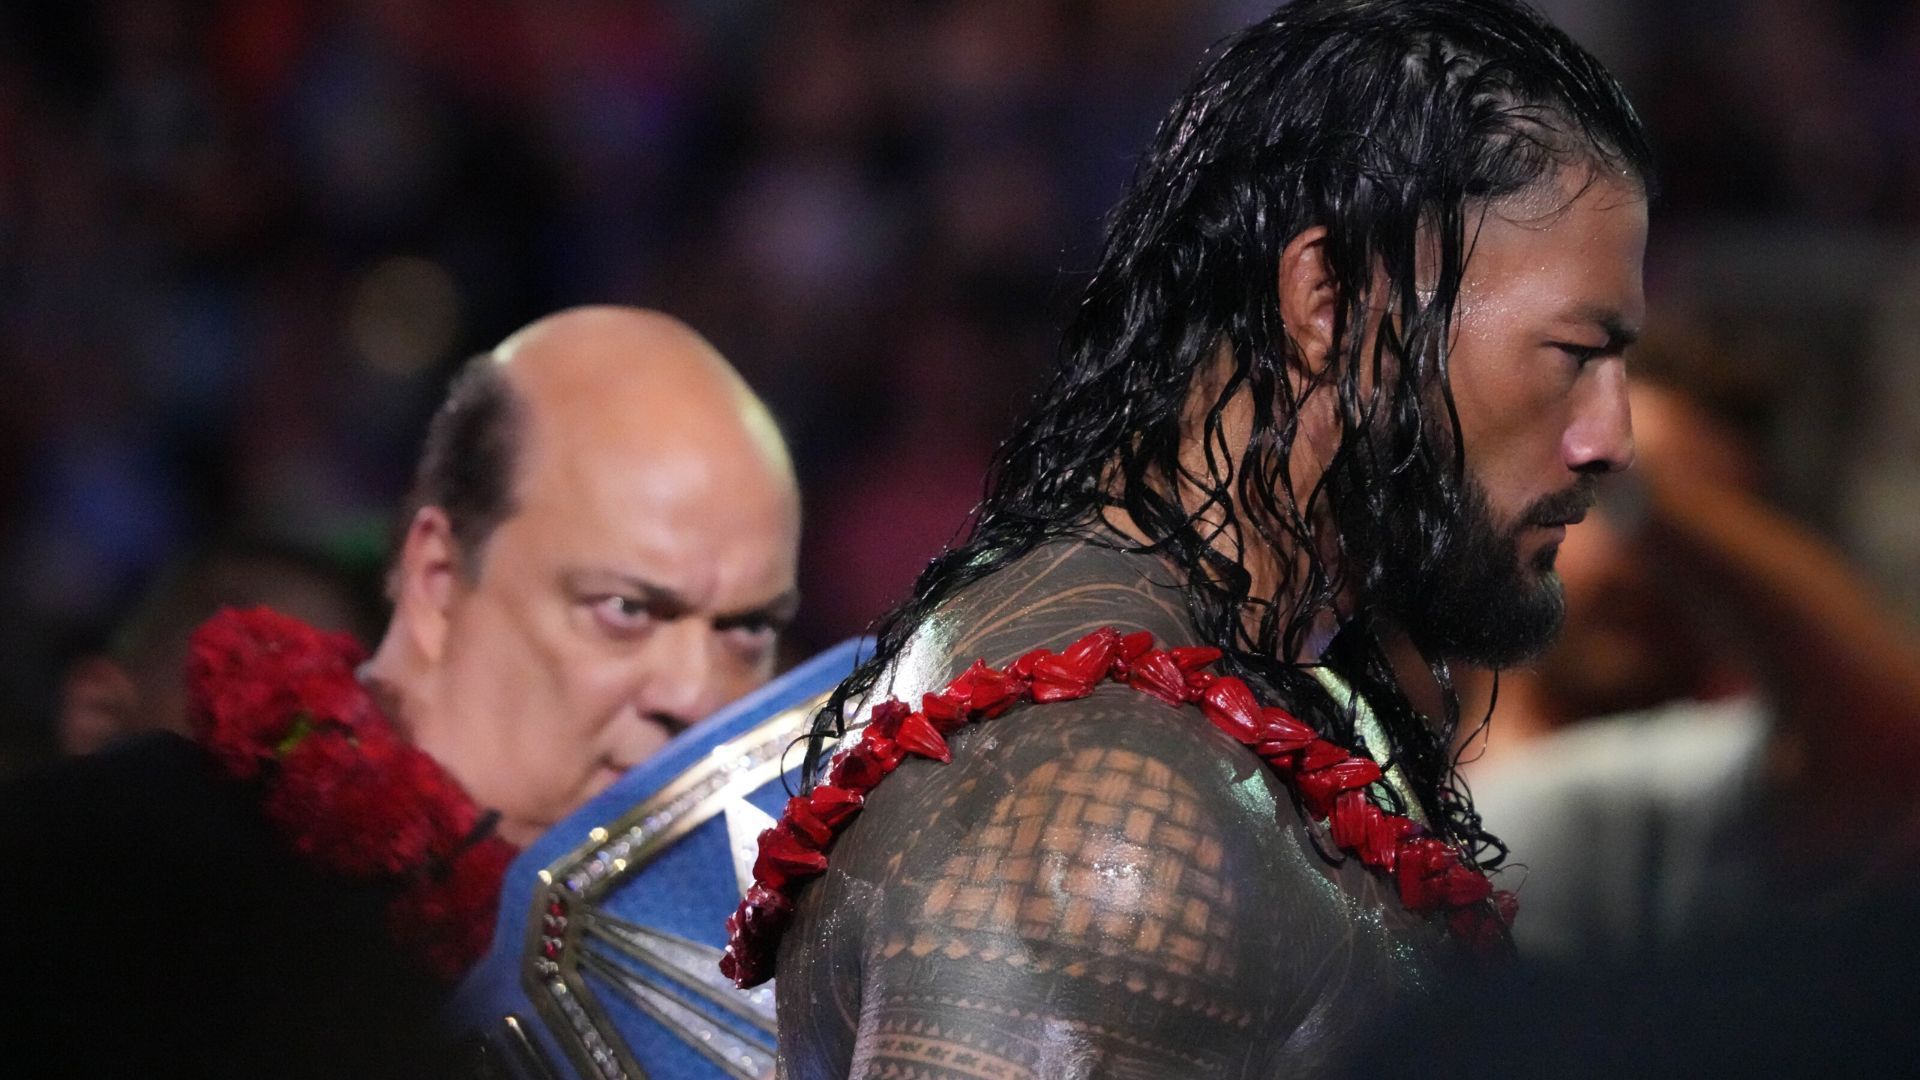 WWE Backlash 2023 might see Roman Reigns go against top stars